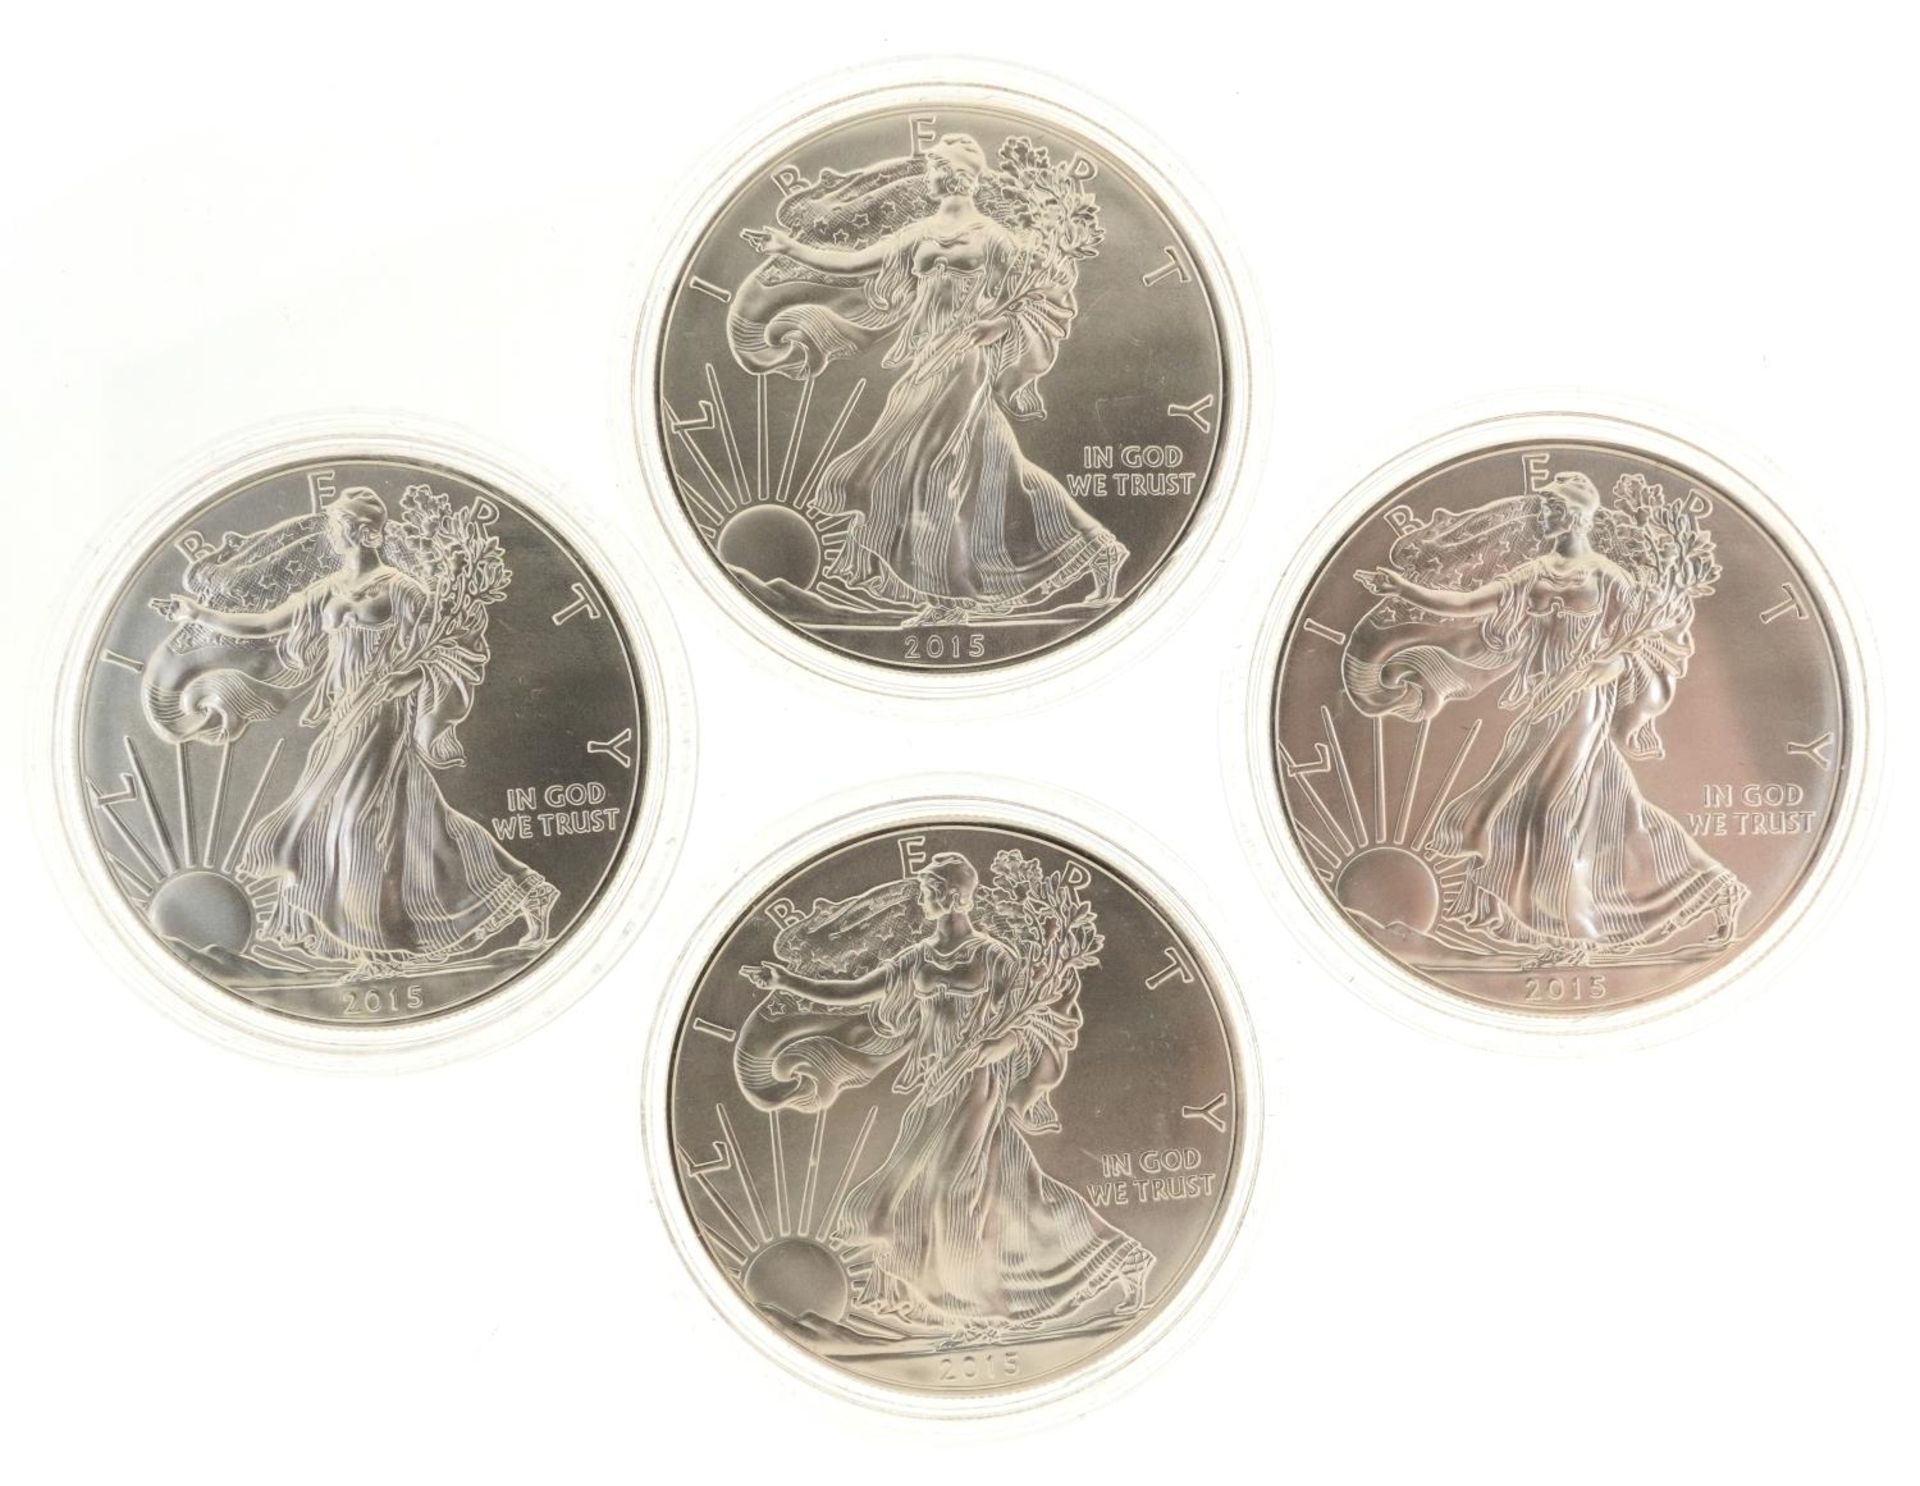 Four 2015 United States of America one ounce fine silver Liberty dollars : For further information